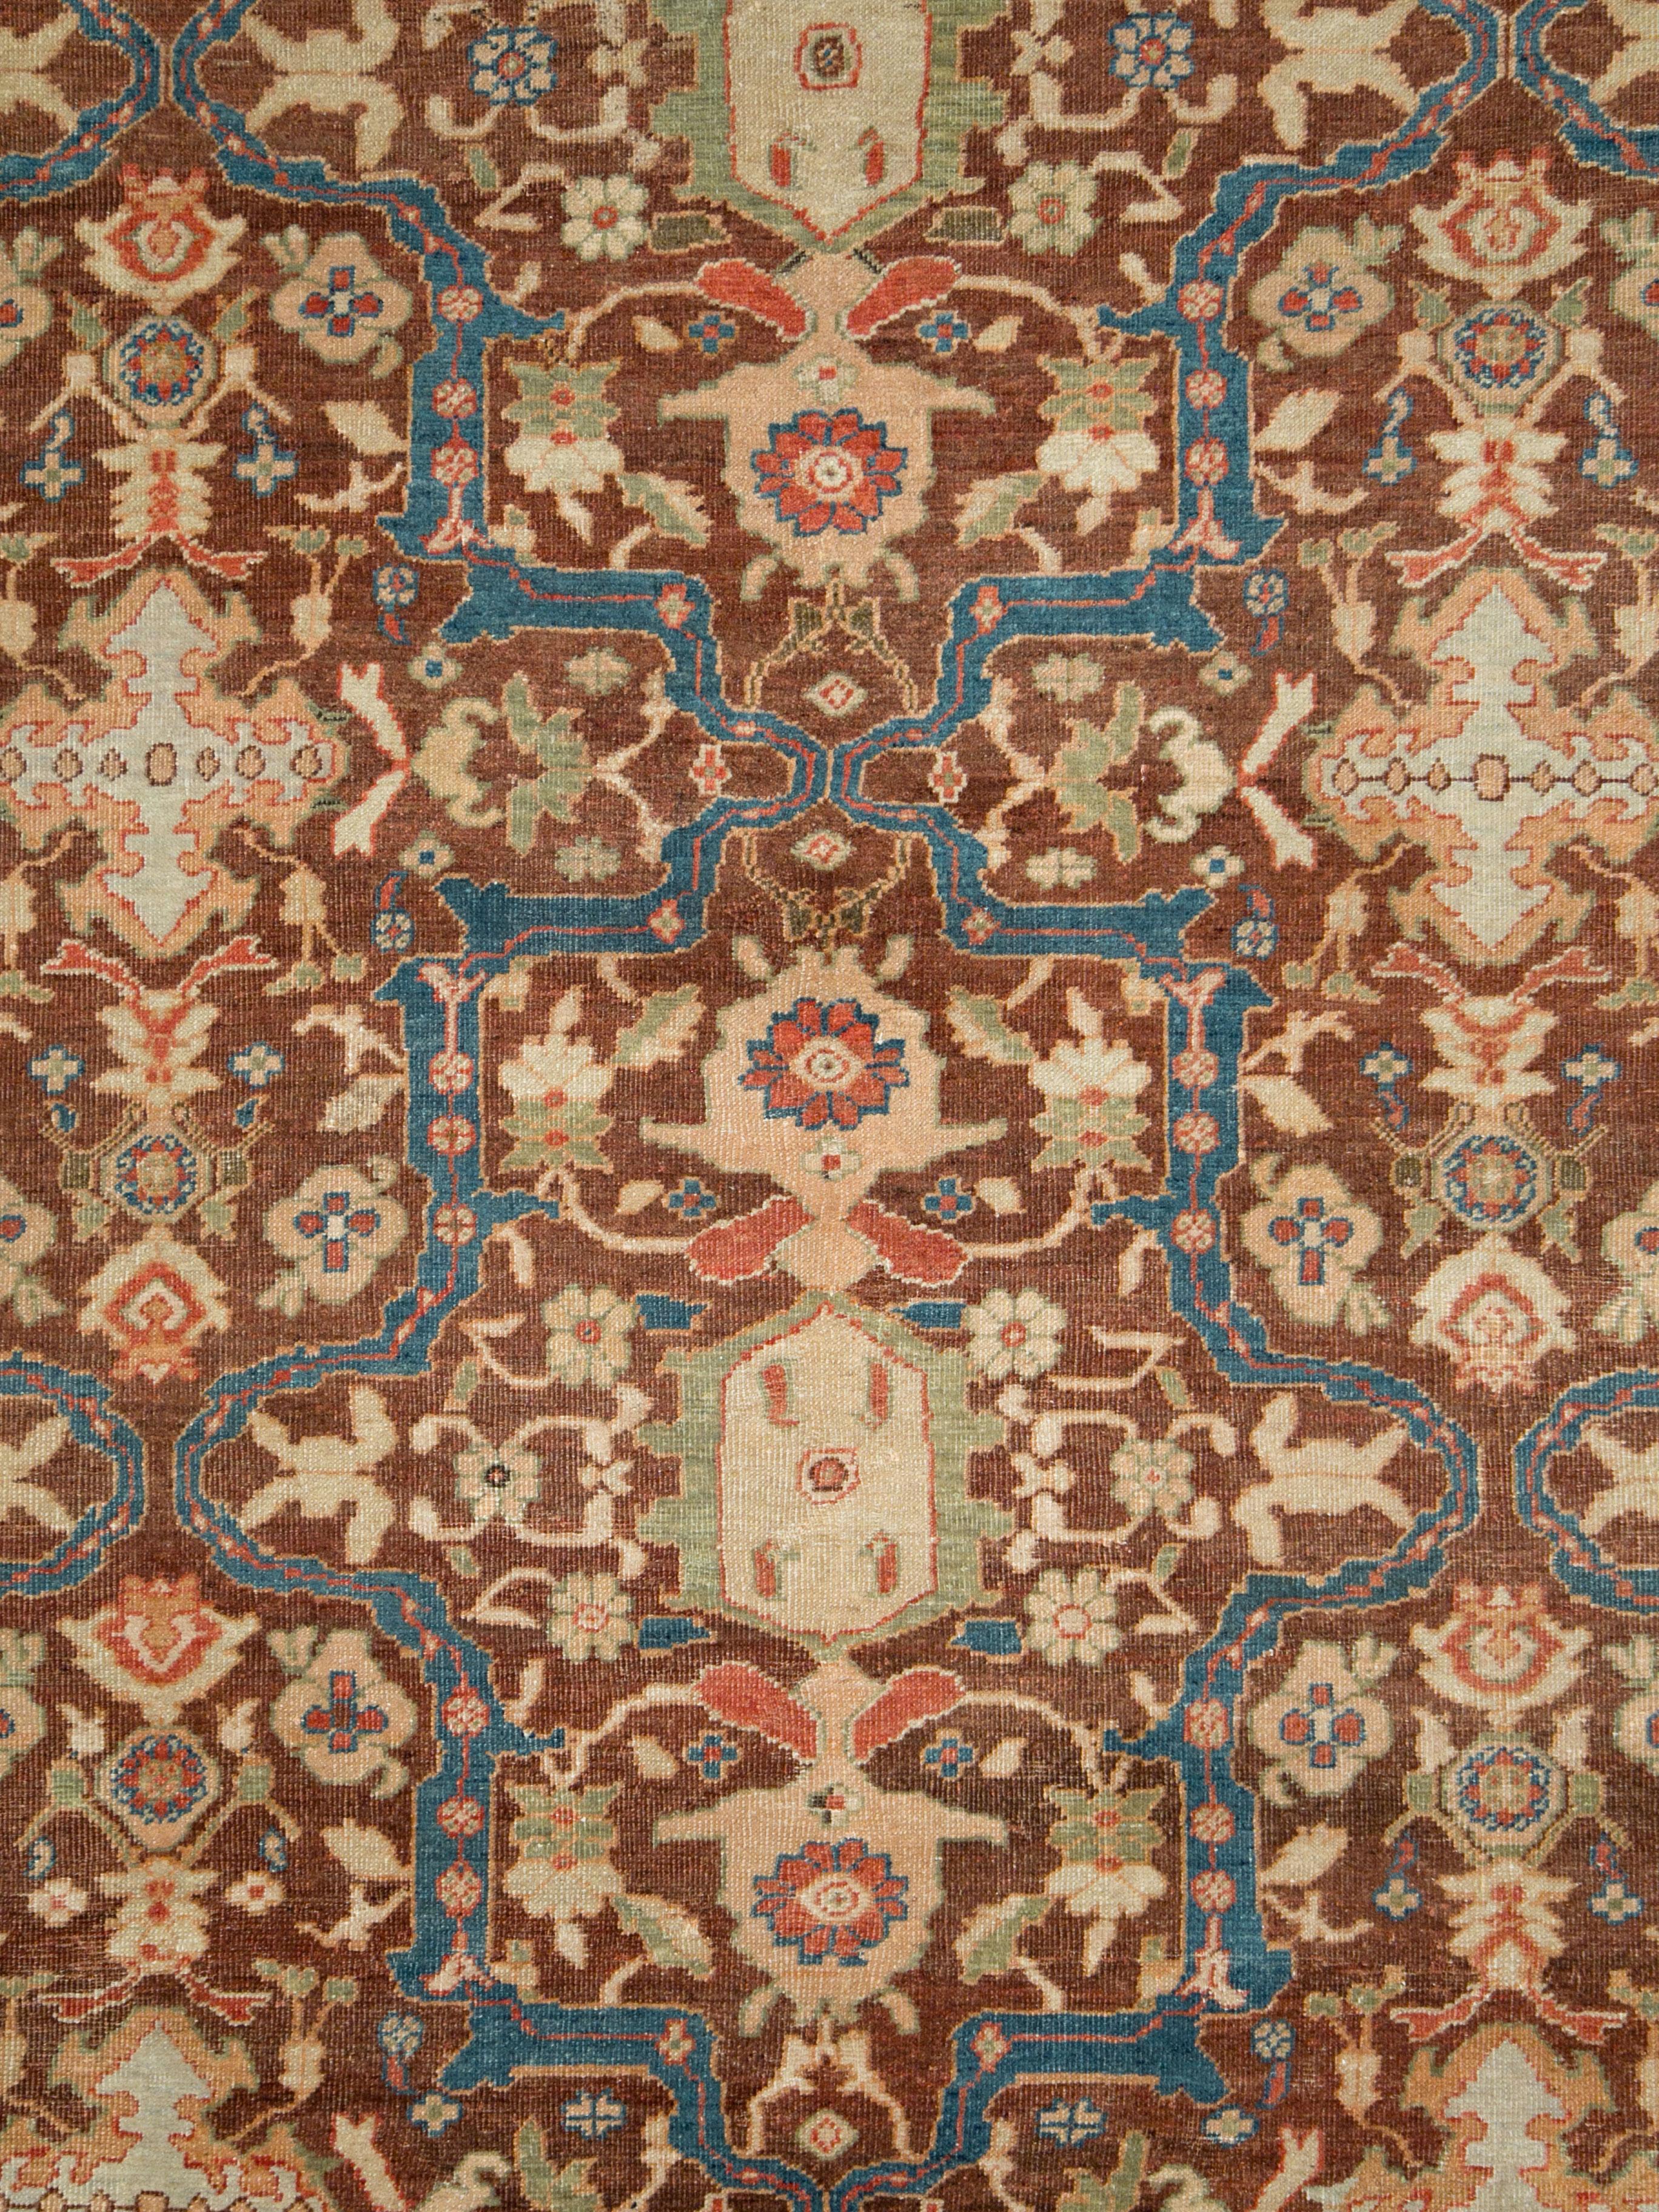 An antique Persian Mahal carpet from the early 20th century.